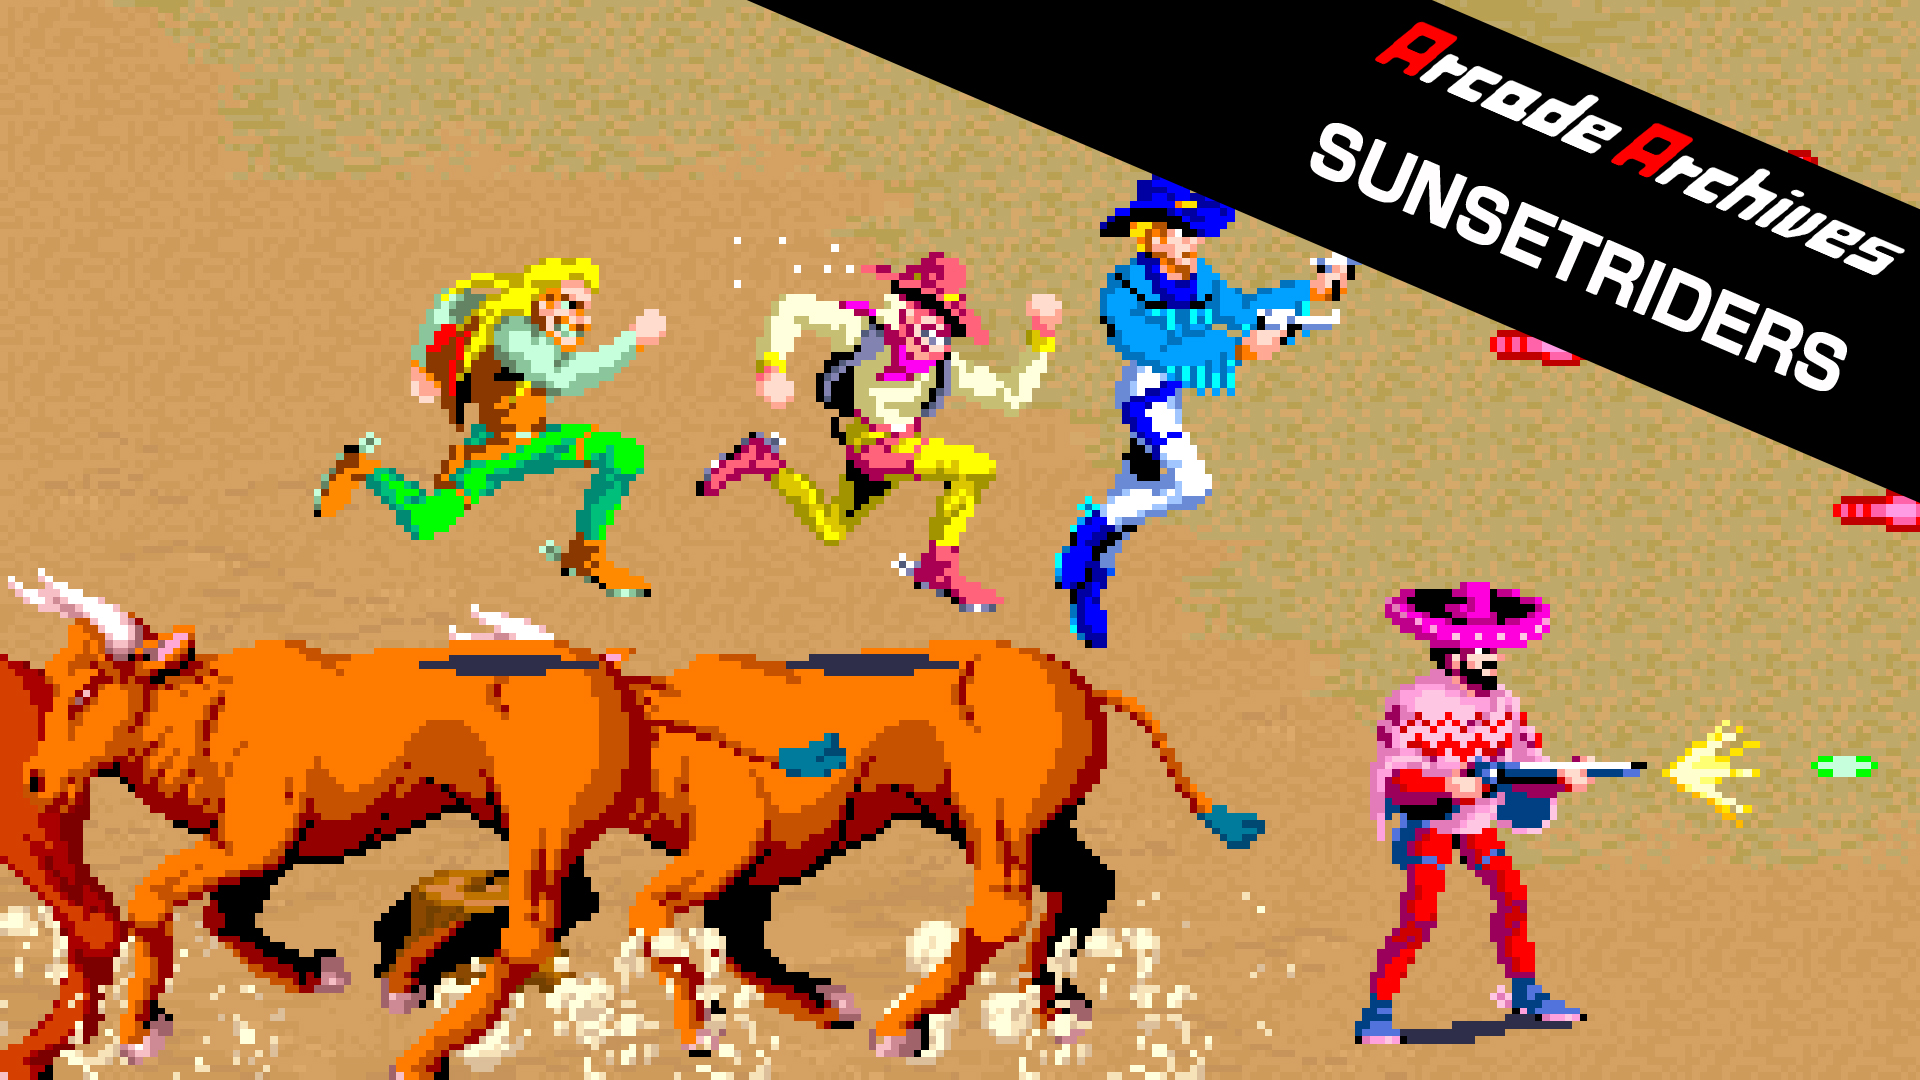 Arcade Archives SUNSETRIDERS for Nintendo Switch Game Details